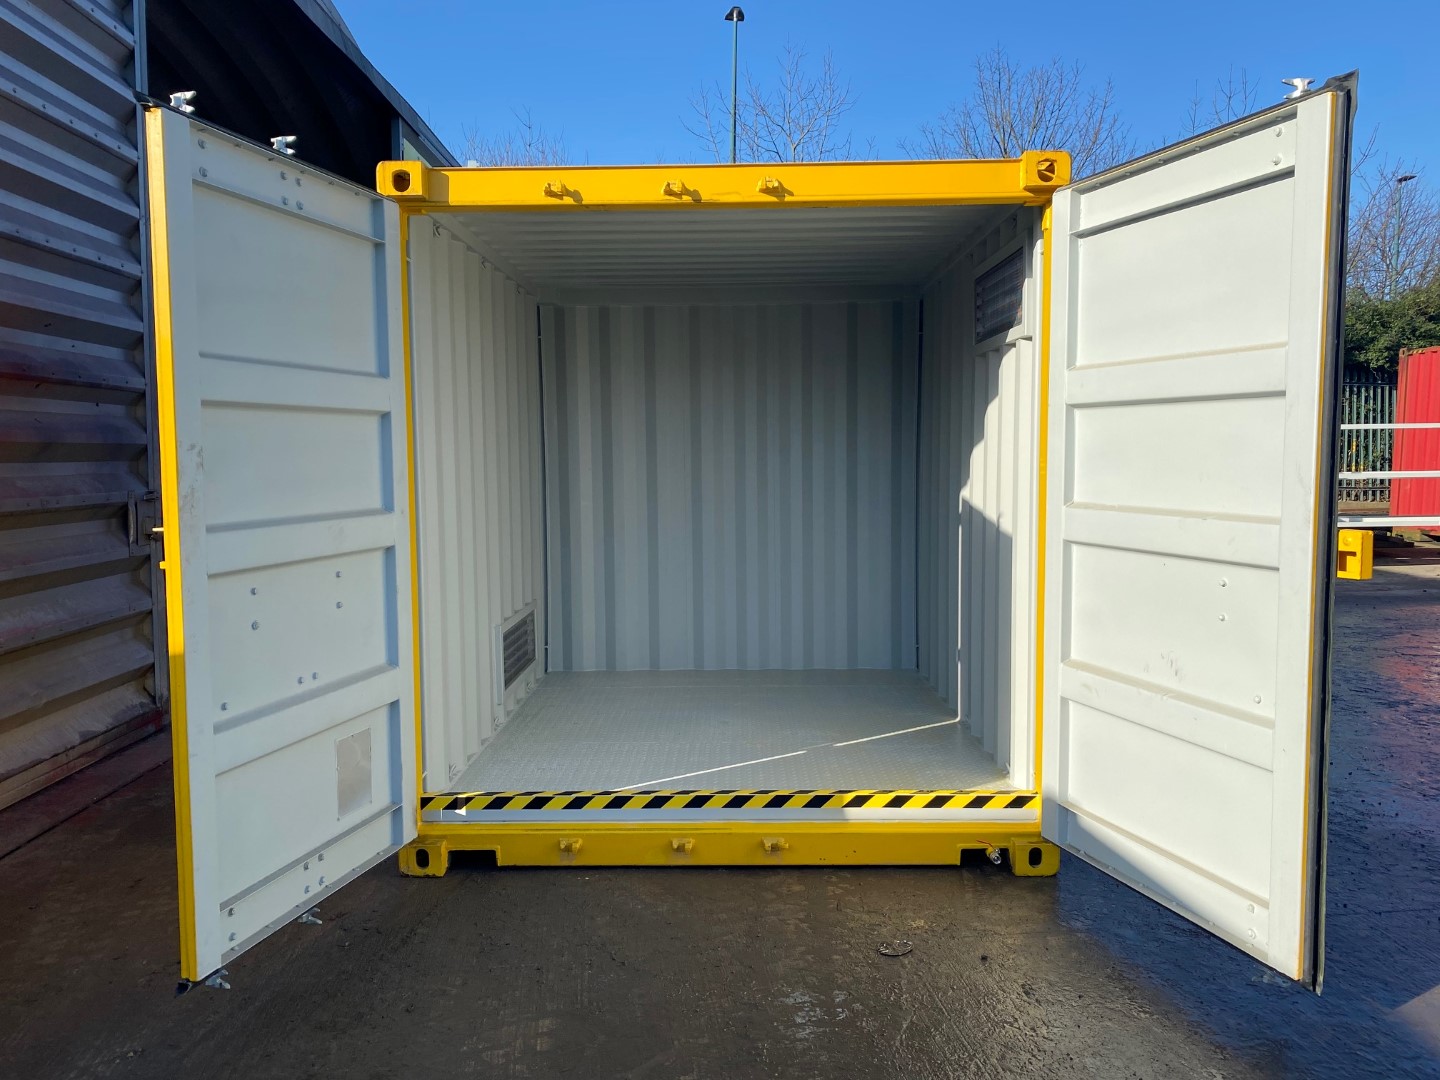 UK Suppliers of Bunded Chemical Storage Containers